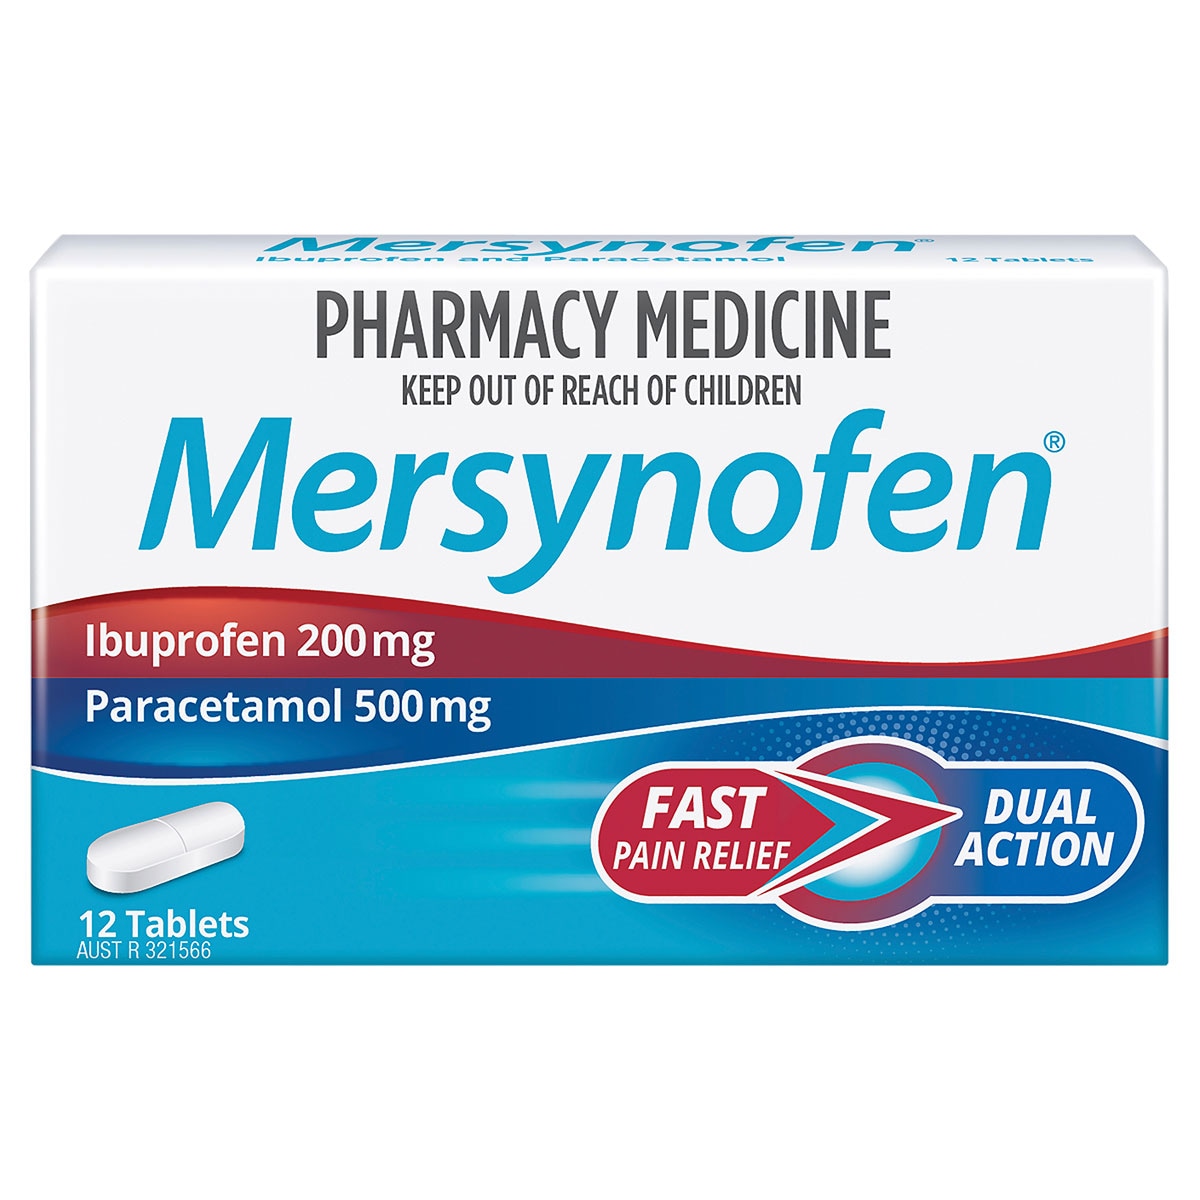 Mersynofen Dual Action Fast Pain Relief 12 Tablets